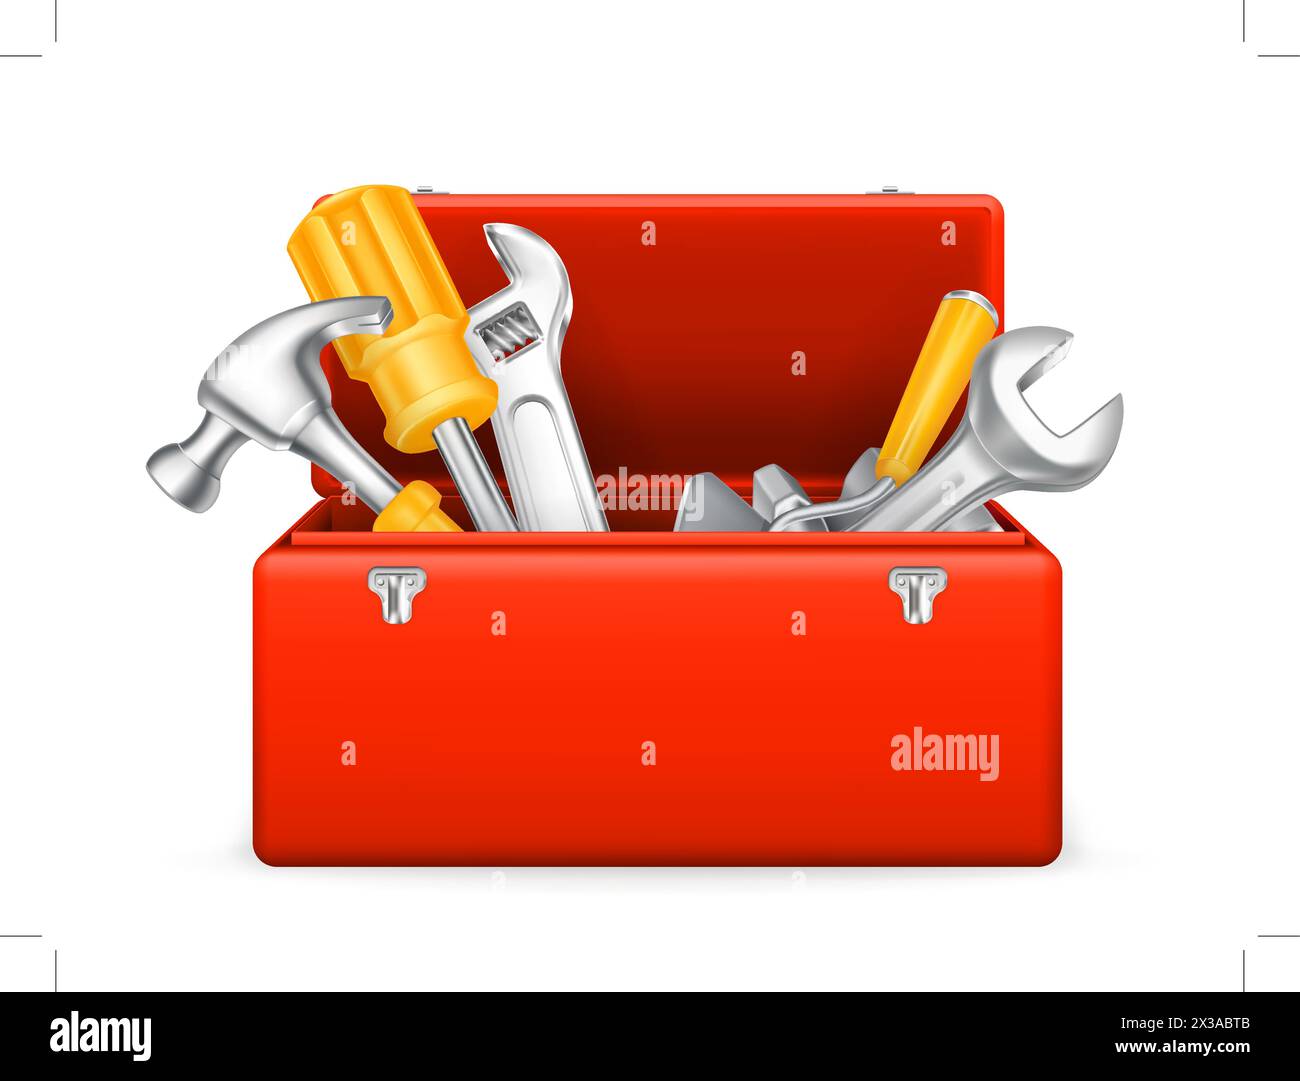 Tool shed, tool kit, tool box, set of wrenches, vector icon Stock Vector